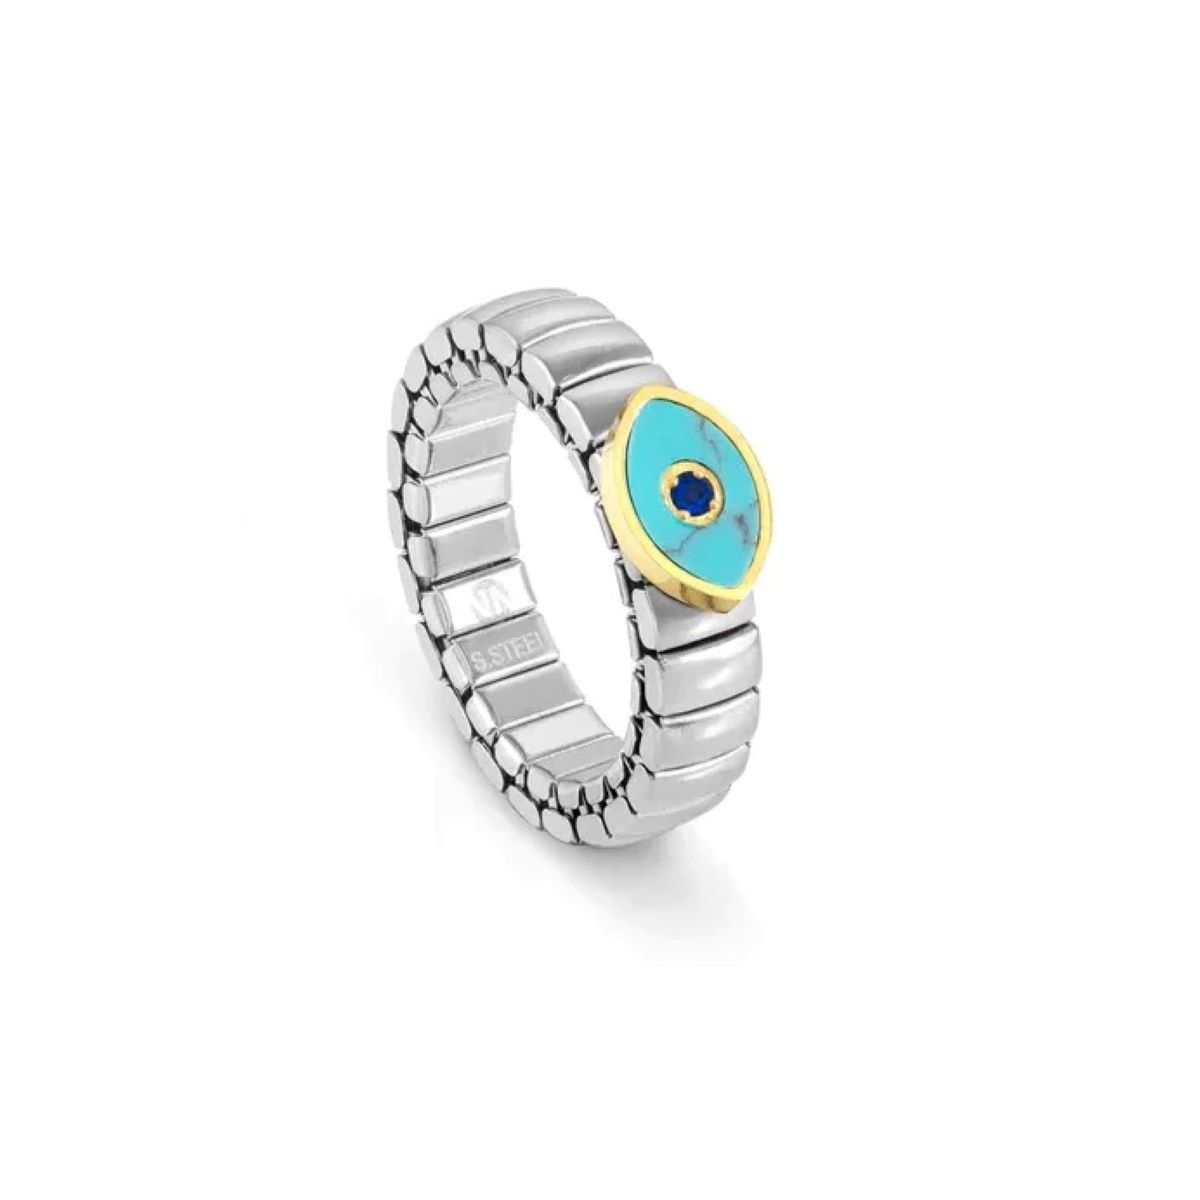 Nomination Extension Style Ring - Stainless Steel and Stone Turquoise Eye - 046001_112